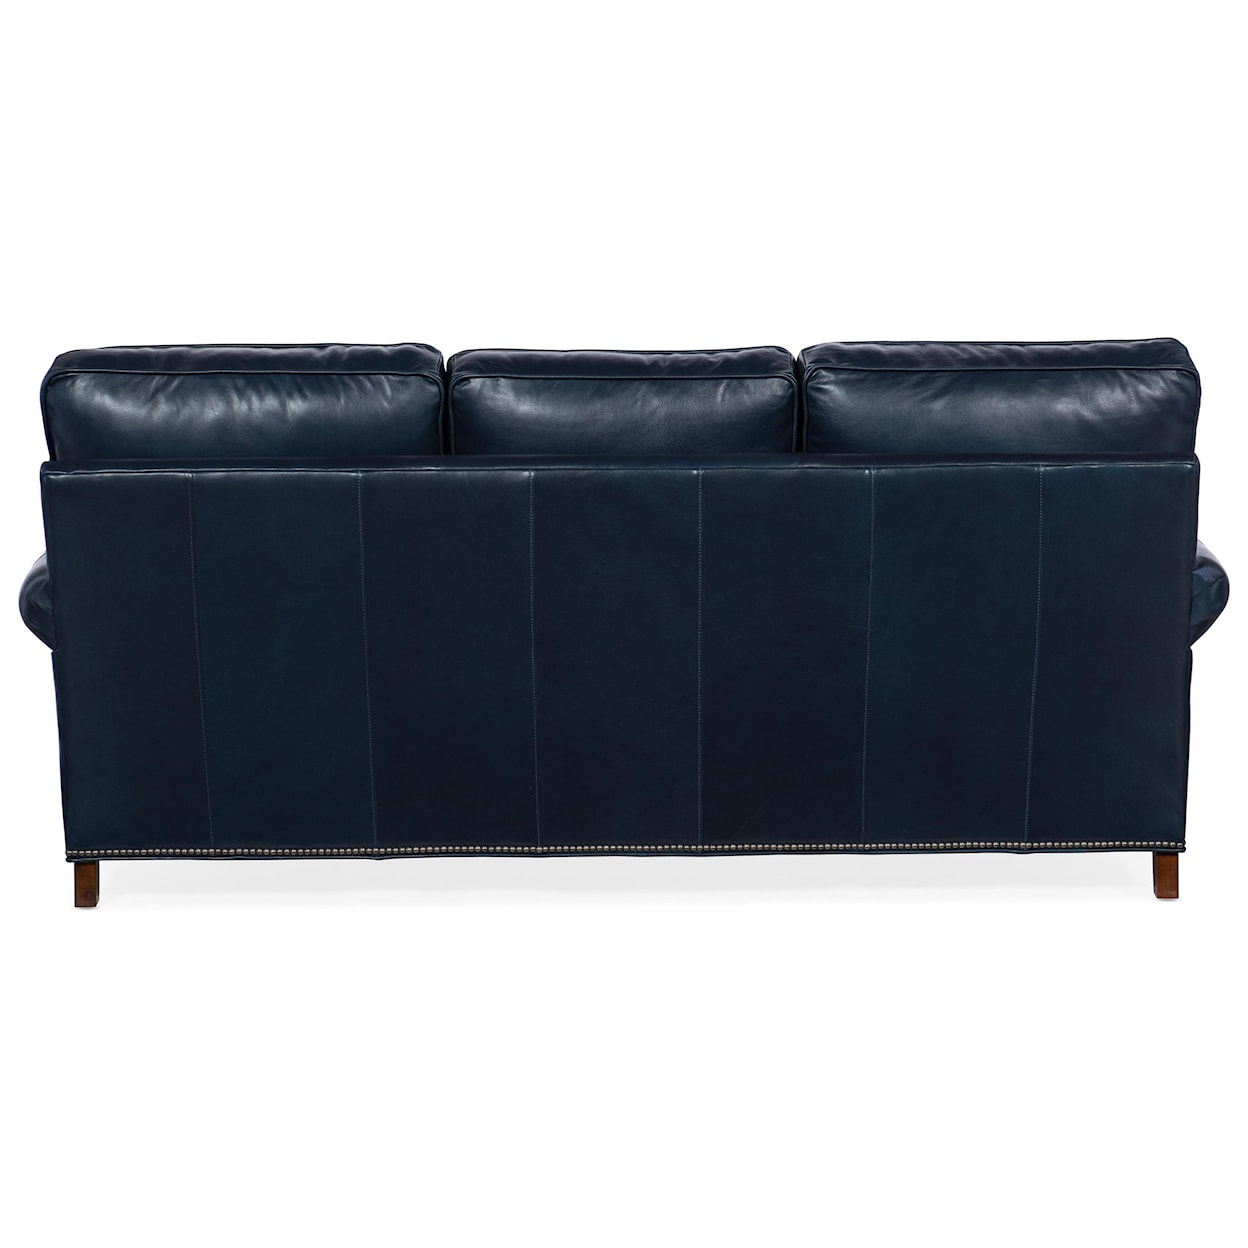 Bradington Young West Haven 759  West Haven Stationary Sofa